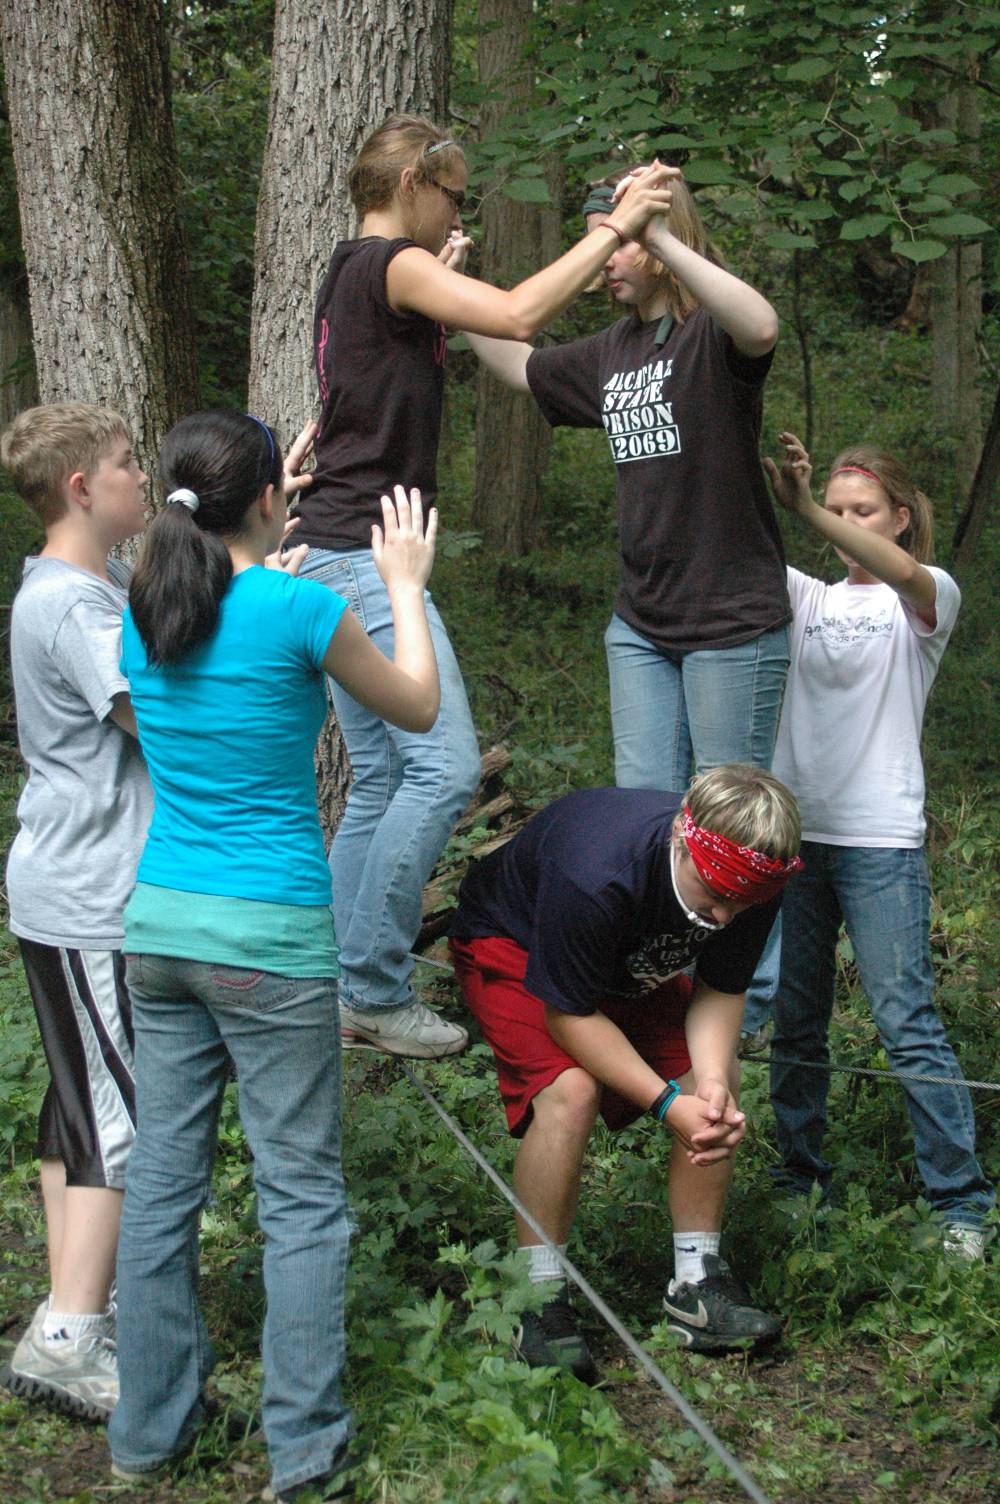 TOP IOWA COED CAMP: Pilgrim Heights Camp & Retreat Center is a Top Coed Summer Camp located in Montour Iowa offering many fun and enriching Coed and other camp programs. Pilgrim Heights Camp & Retreat Center also offers CIT/LIT and/or Teen Leadership Opportunities, too.